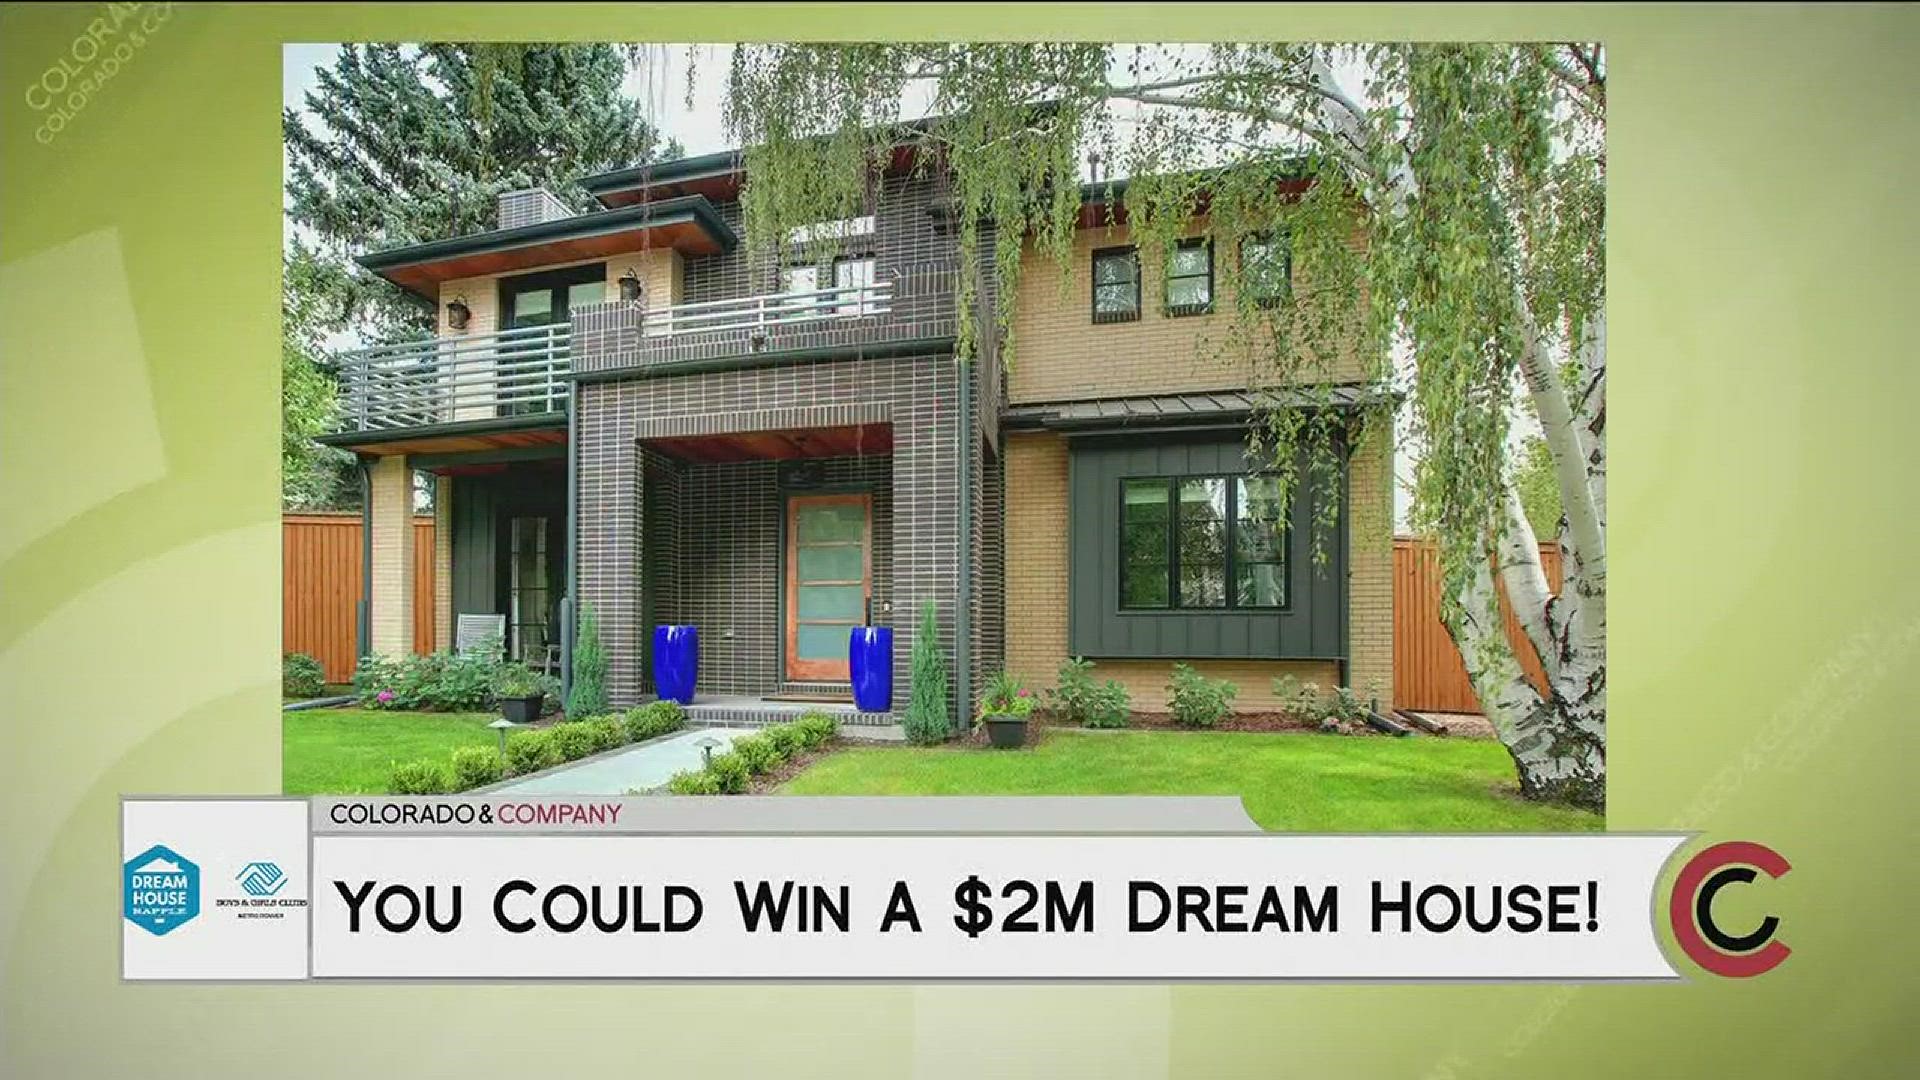 Get your tickets now for the Dream House Raffle to help Boys and Girls Clubs of Metro Denver. The grand prize is a $2 Million dream home or, take the same amount in cash! Early bird deadline for fantastic prizes is March 22nd. Enter now at www.MileHighRaffle.com, or call 888.506.6053. 
THIS INTERVIEW HAS COMMERCIAL CONTENT. PRODUCTS AND SERVICES FEATURED APPEAR AS PAID ADVERTISING.